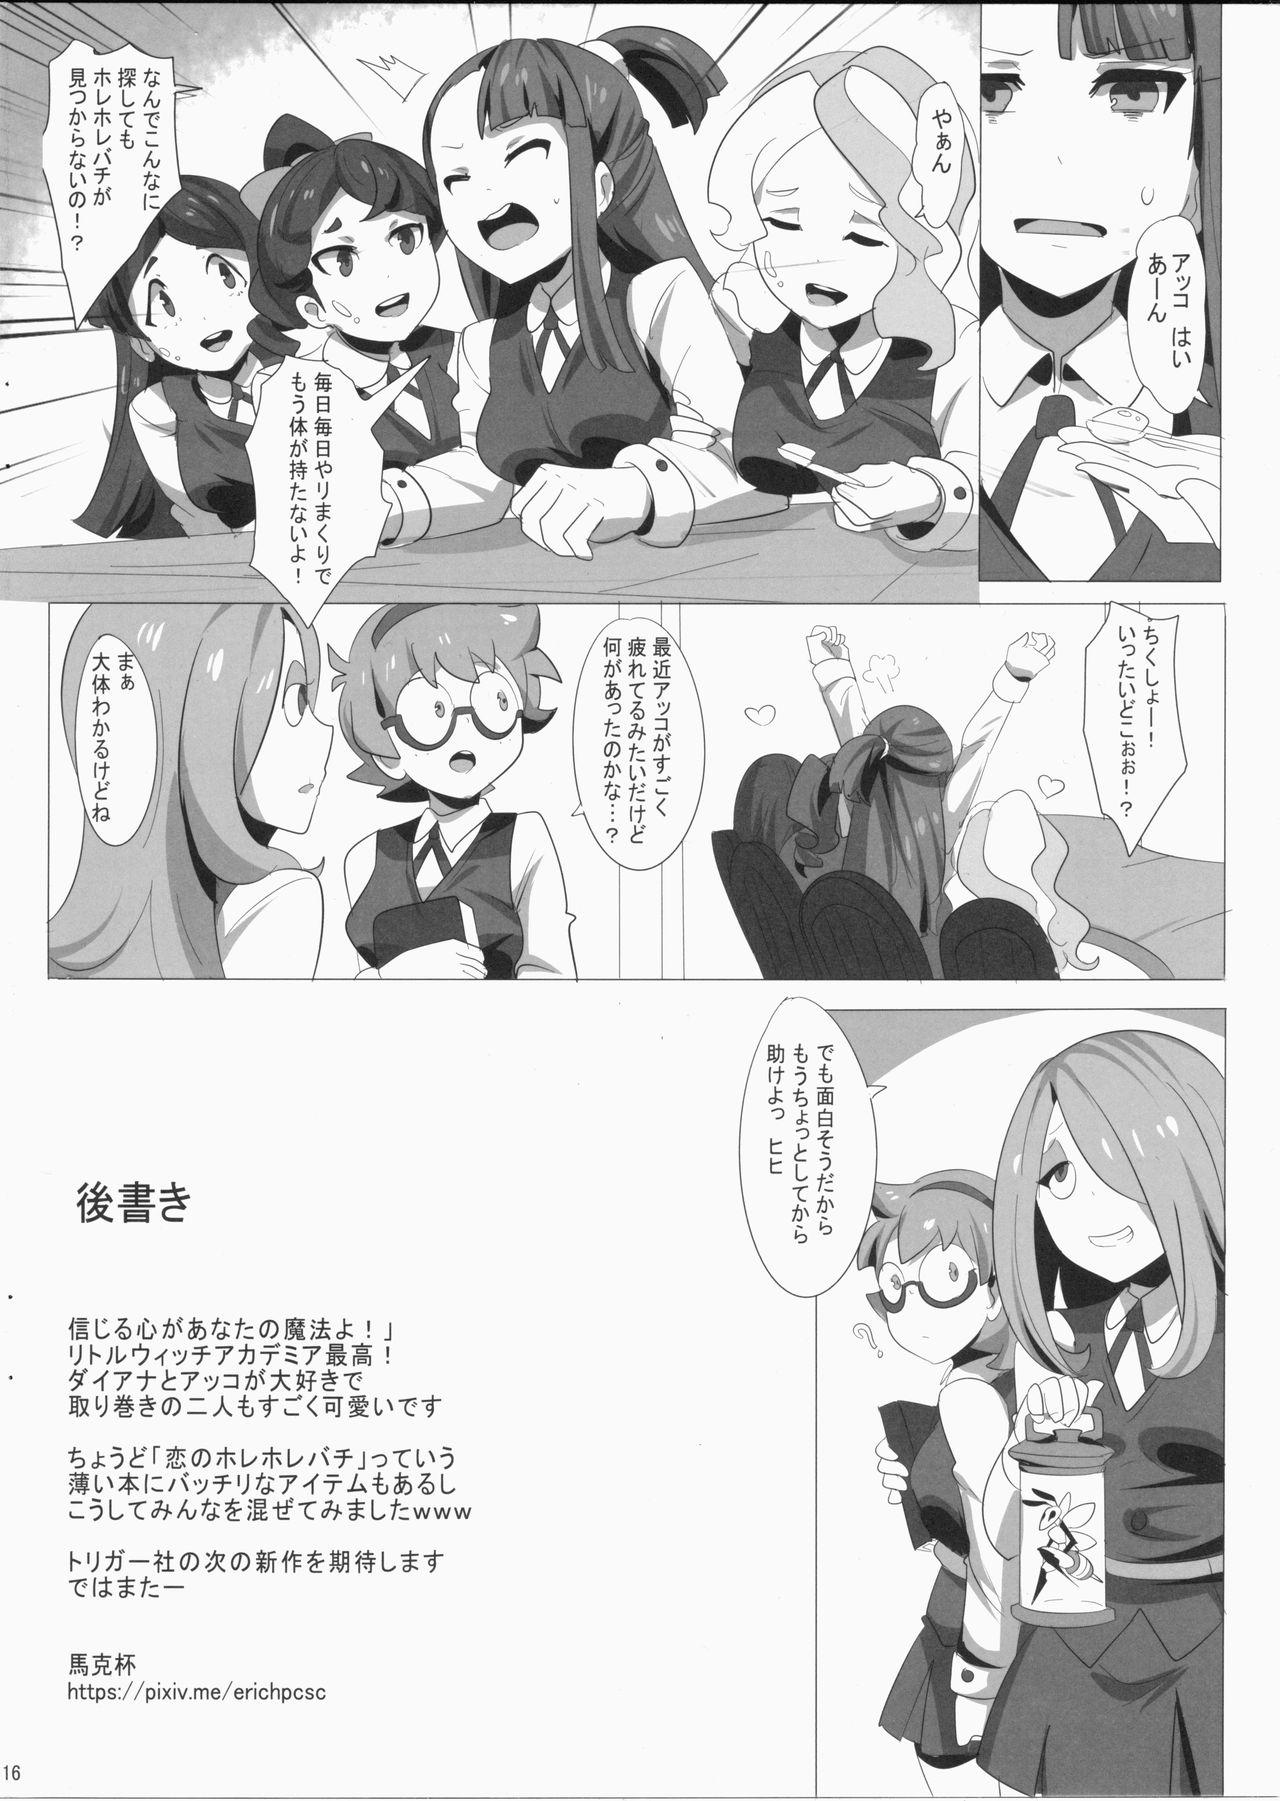 Ameture Porn Dai Akko - Little witch academia Off - Page 17